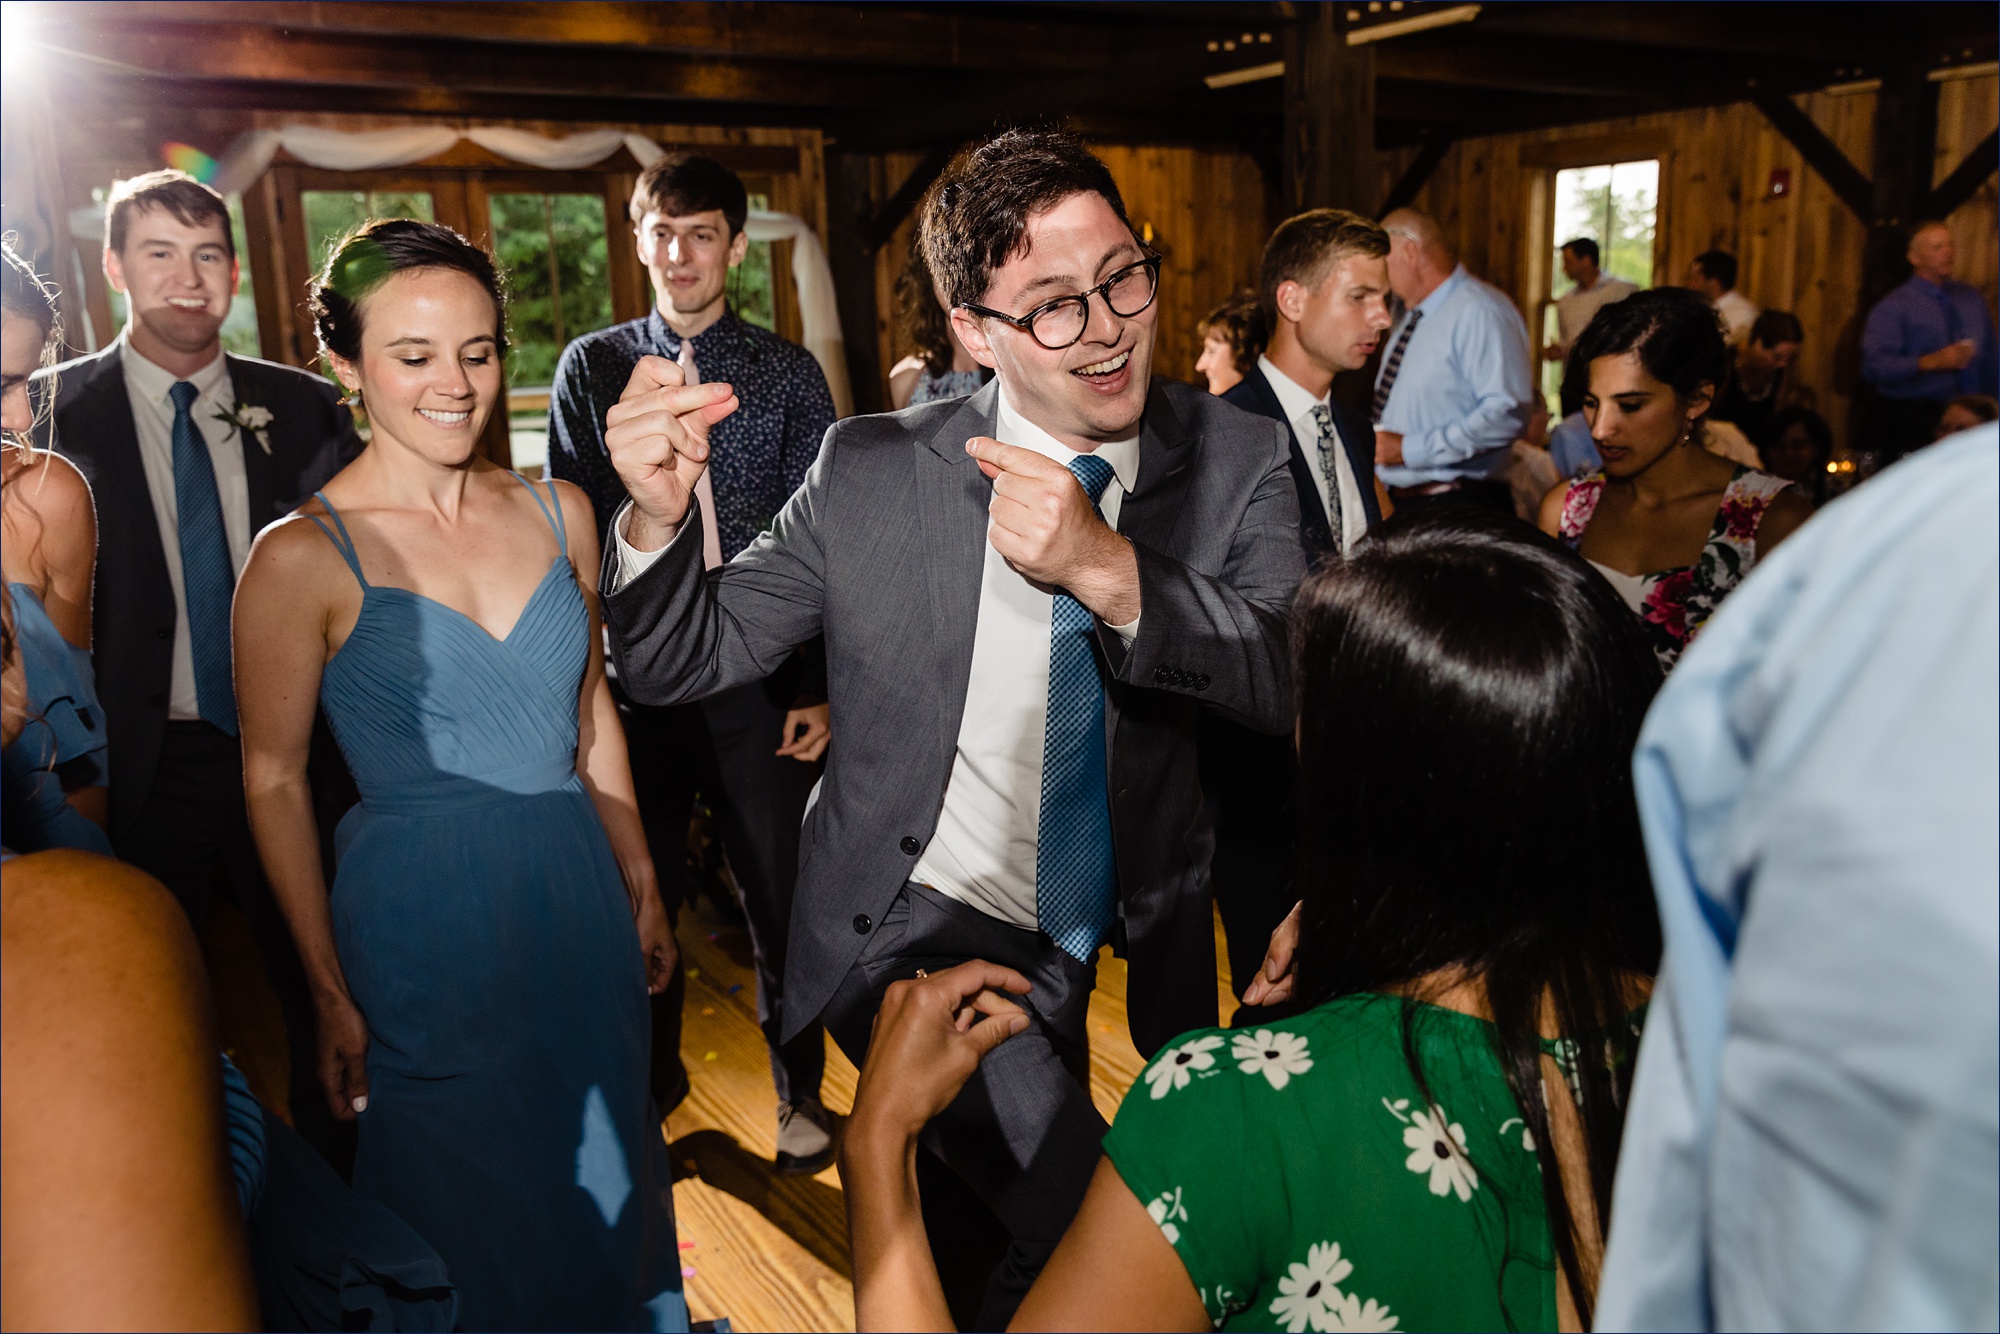 Dancing and partying inside the barn for the NH wedding reception